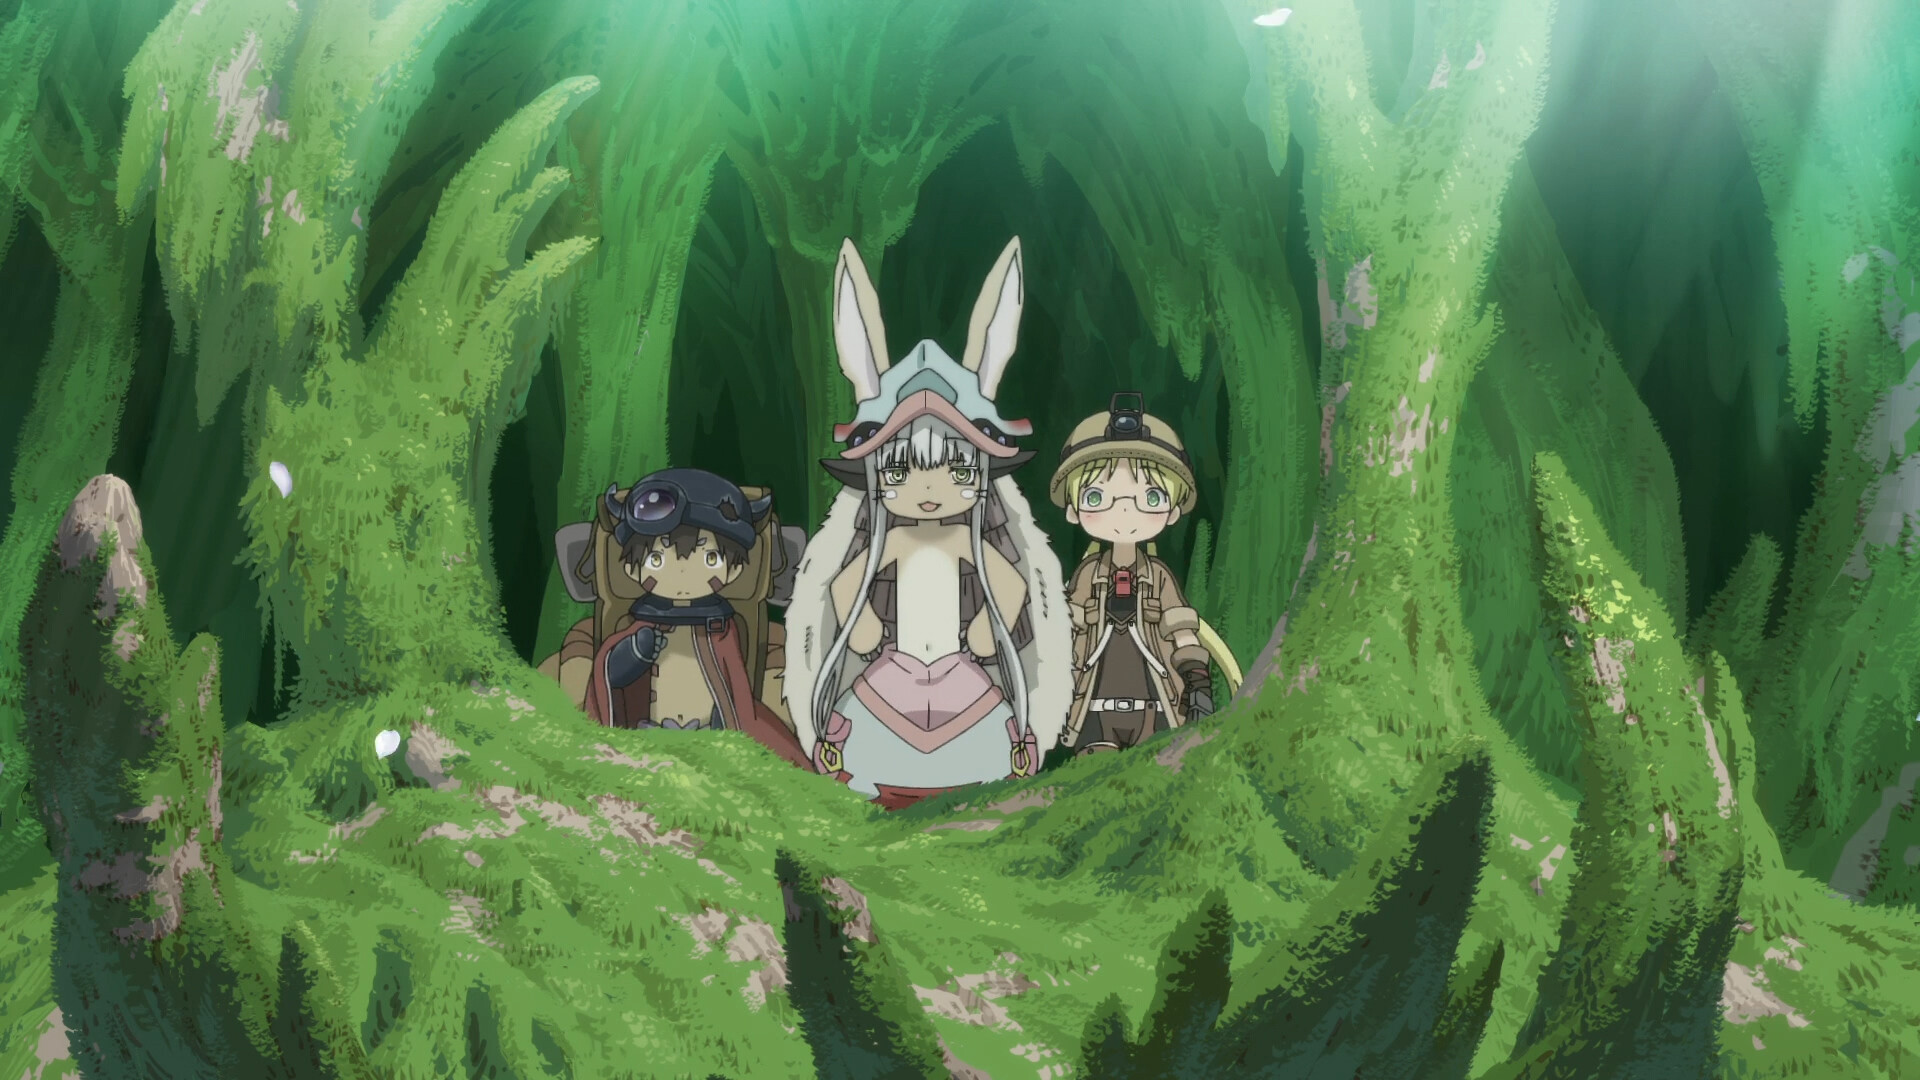 Made in Abyss (TV Series): Anime, Was nominated for the 11th Manga Taisho awards. 1920x1080 Full HD Wallpaper.